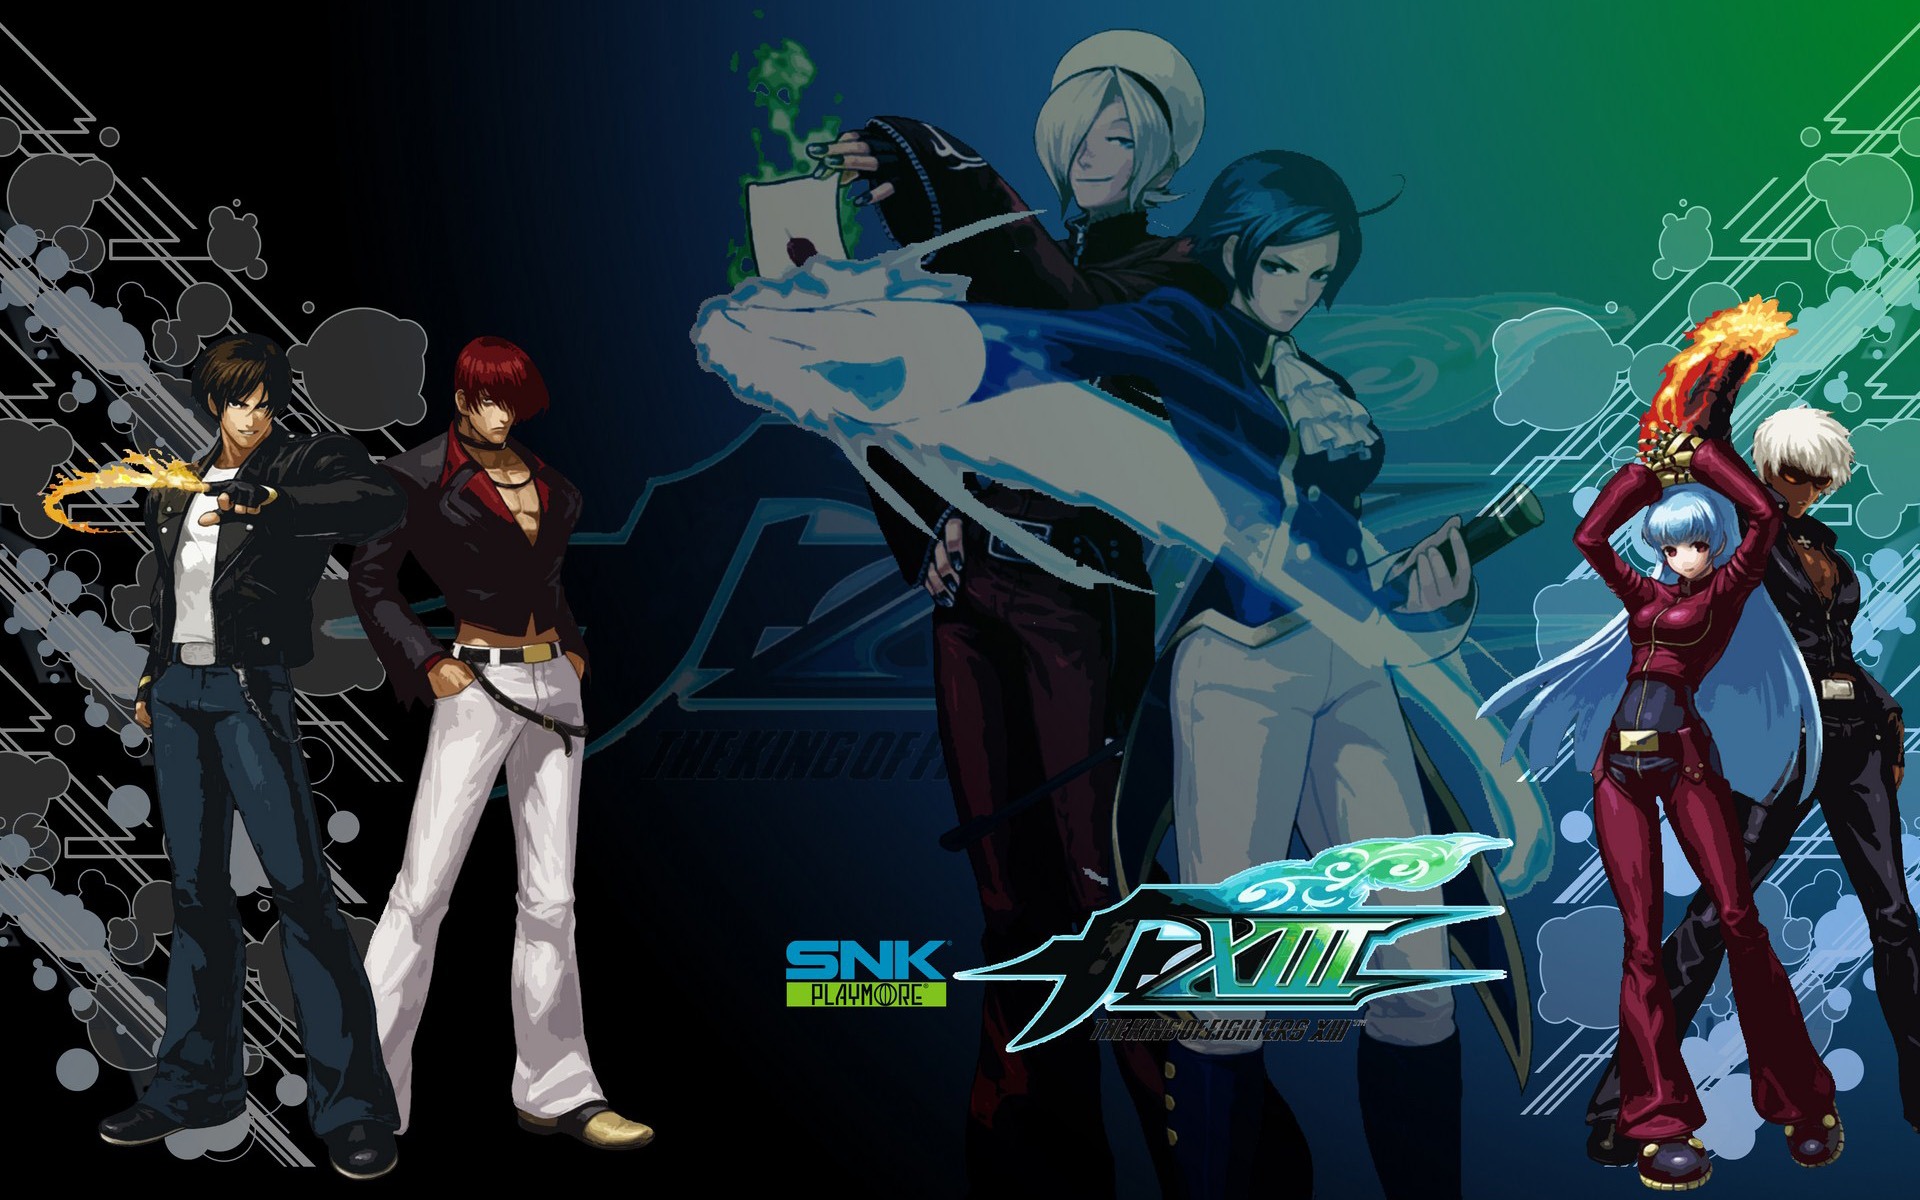 The King of Fighters XIII wallpapers #4 - 1920x1200